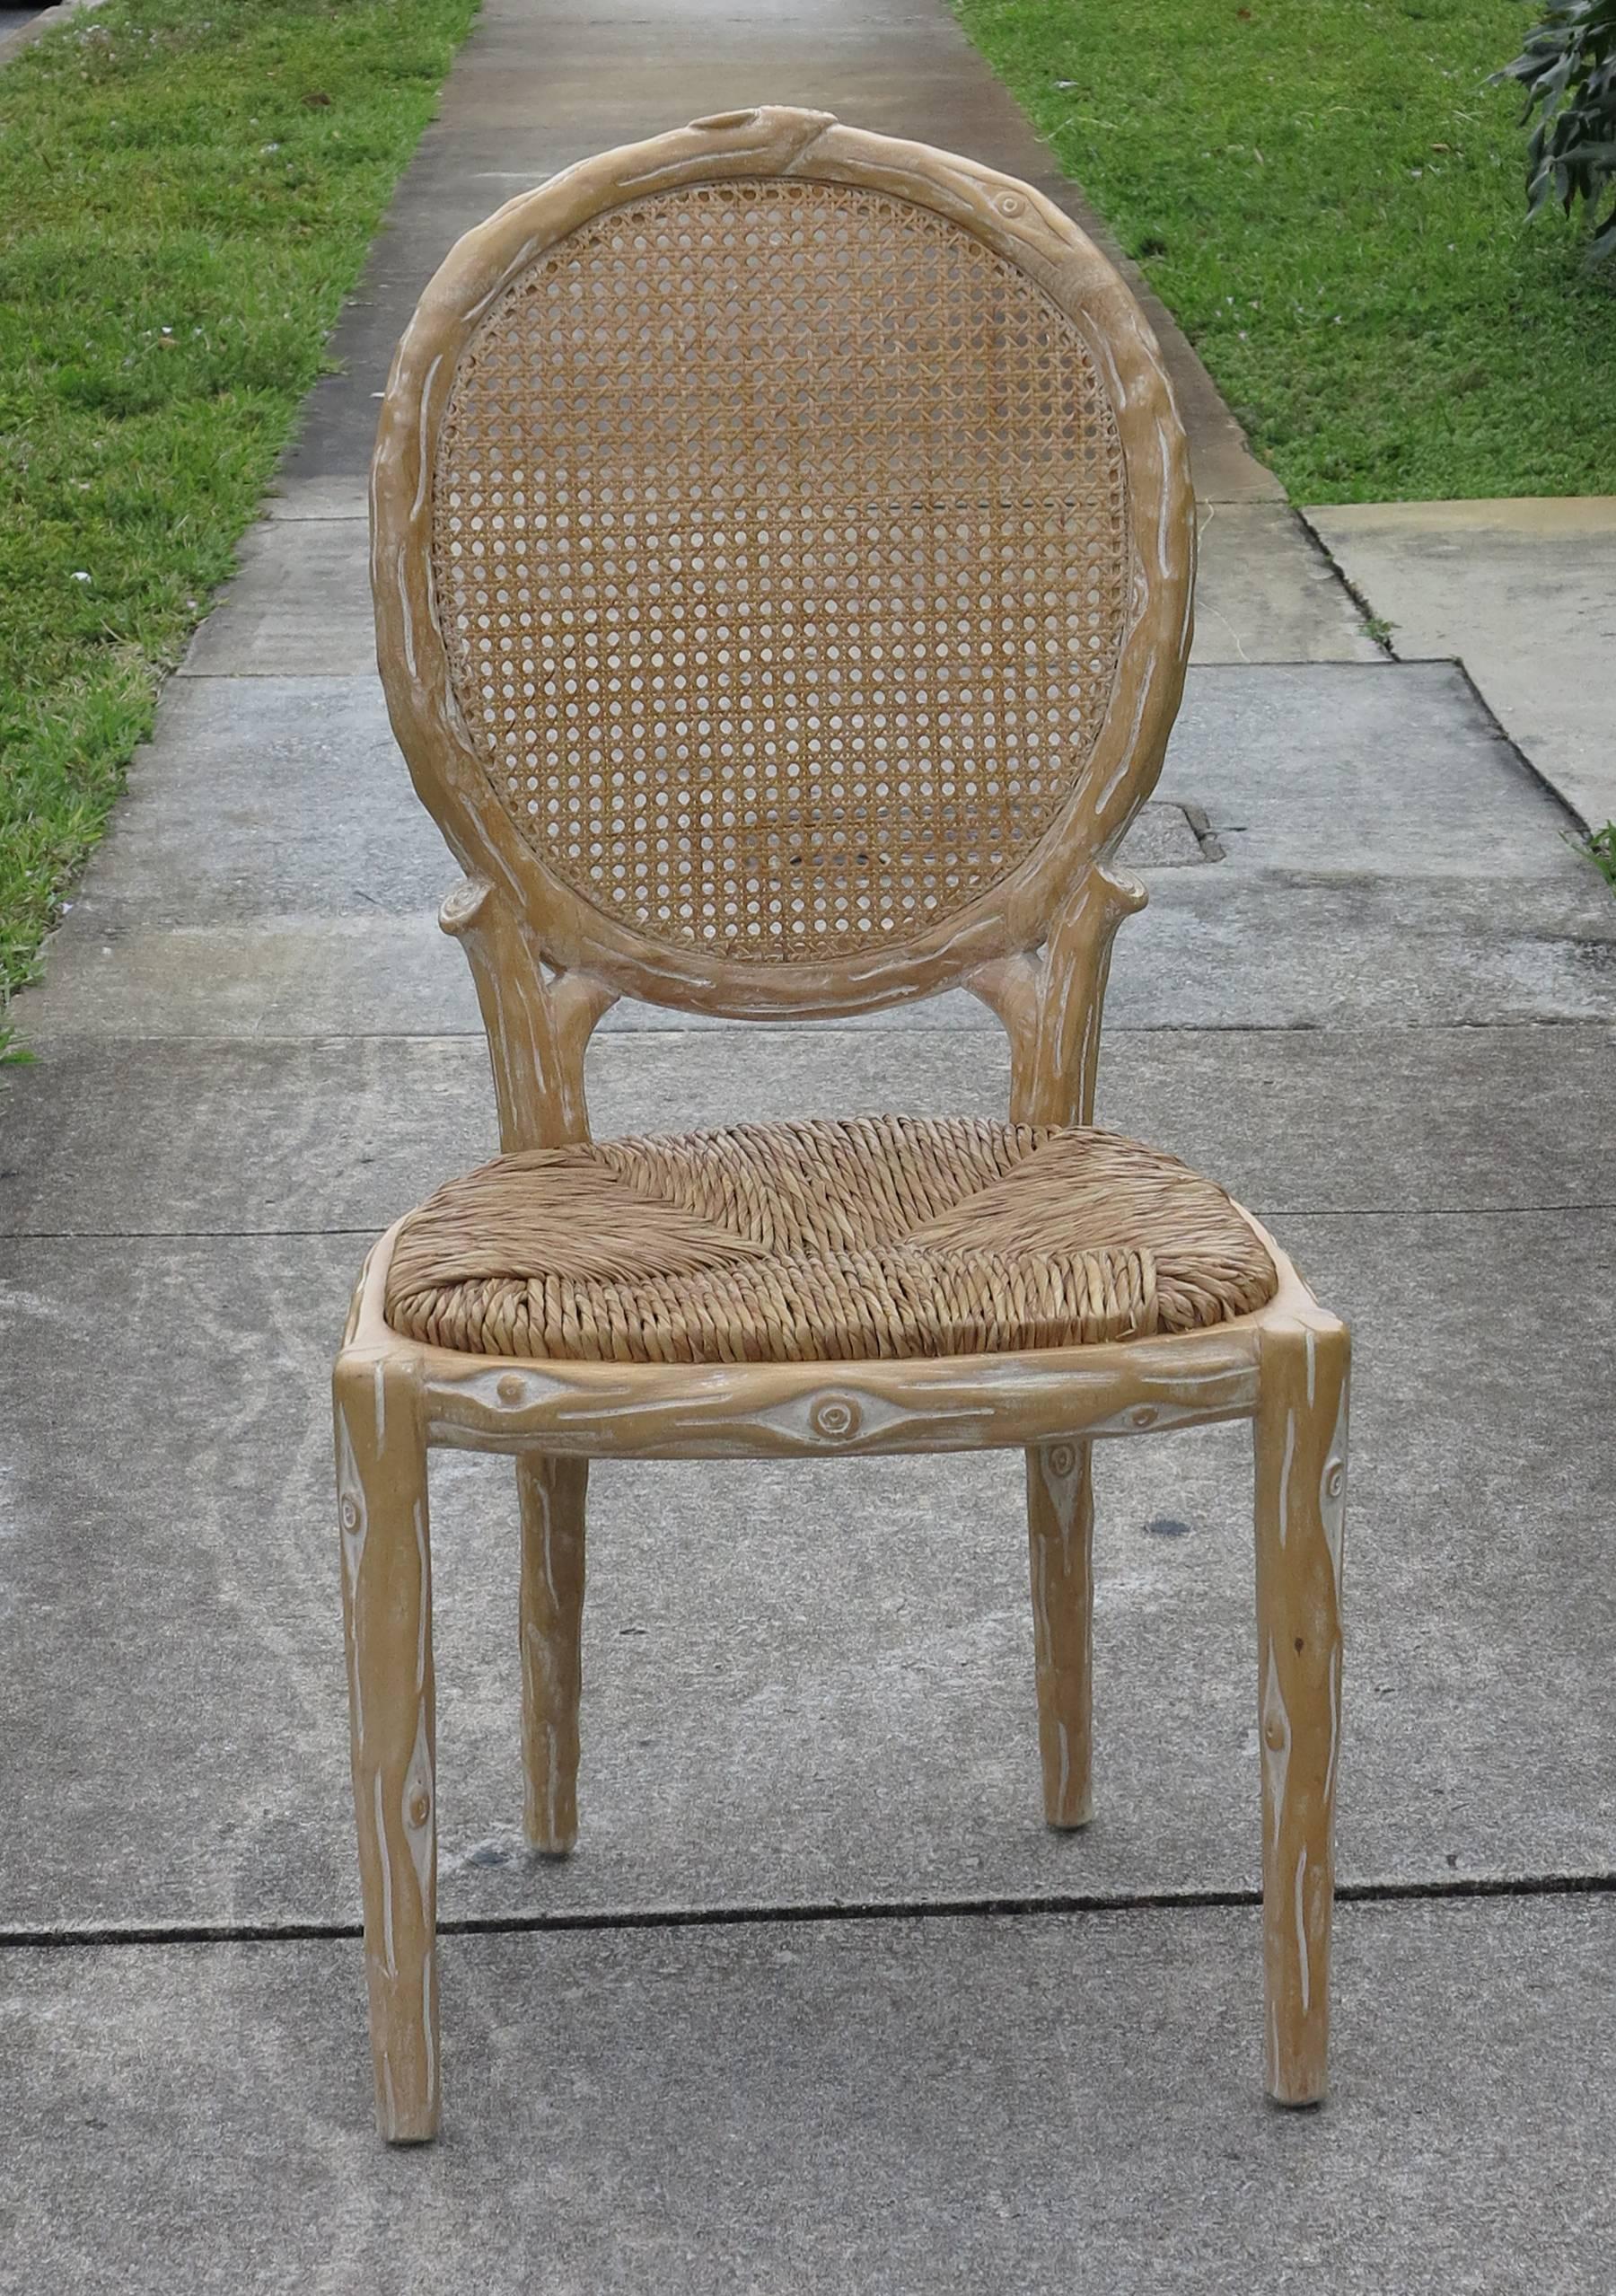 Four vintage dining chairs, four chairs with caned backs and rush seats.
Faux Bois carved twig dining chairs. Natural original finish in excellent condition. No damage to seats or backs.